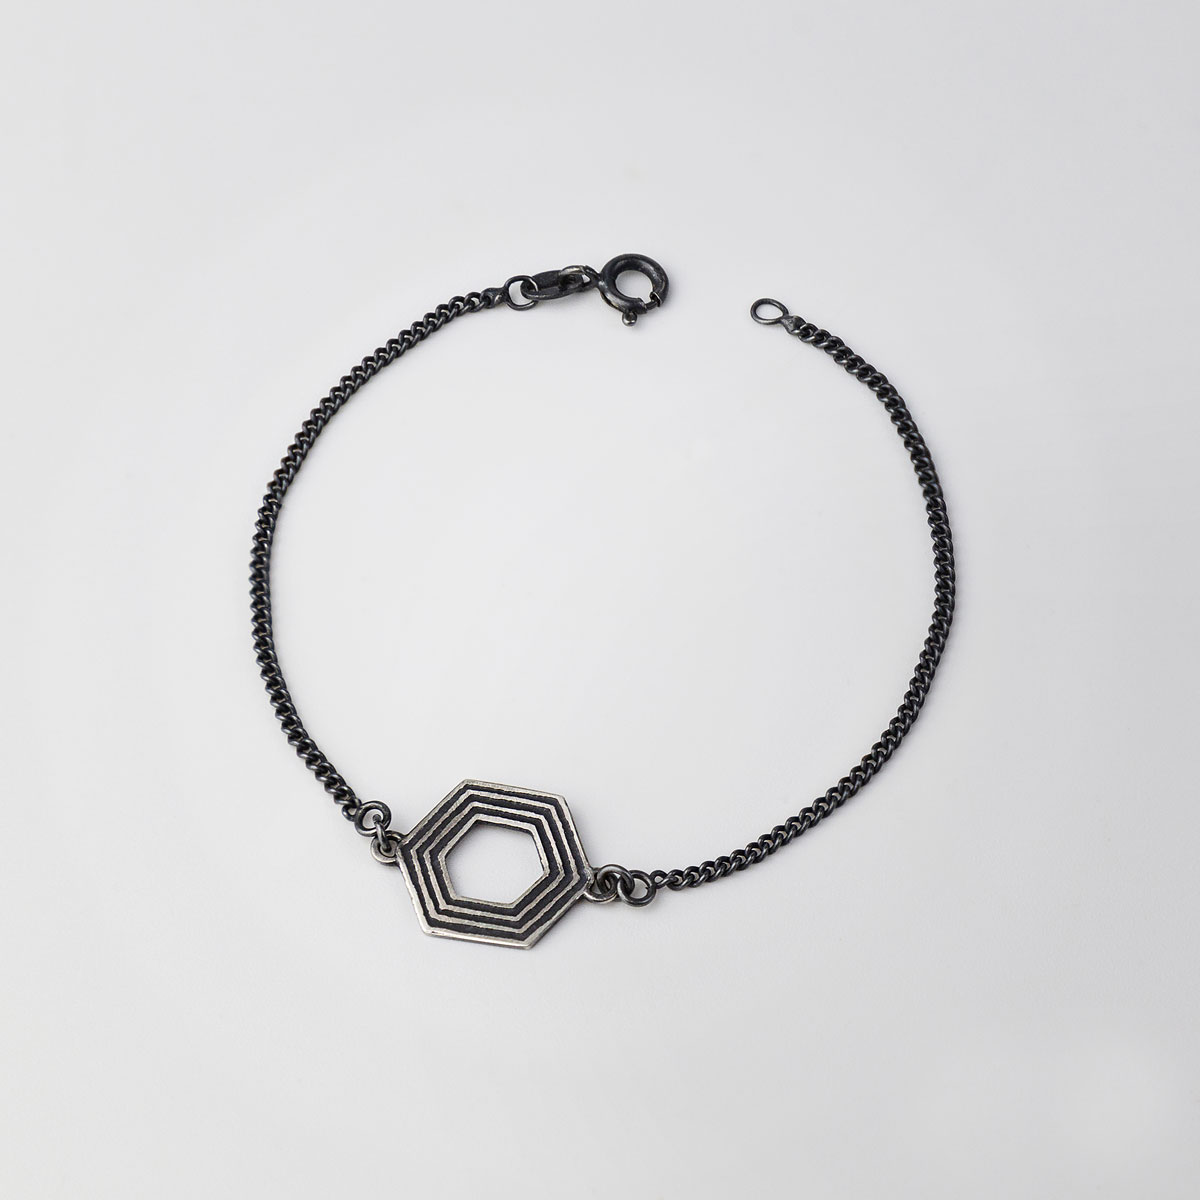 ‘Lines in Motion’ Silver and Black Hexagonal Bracelet